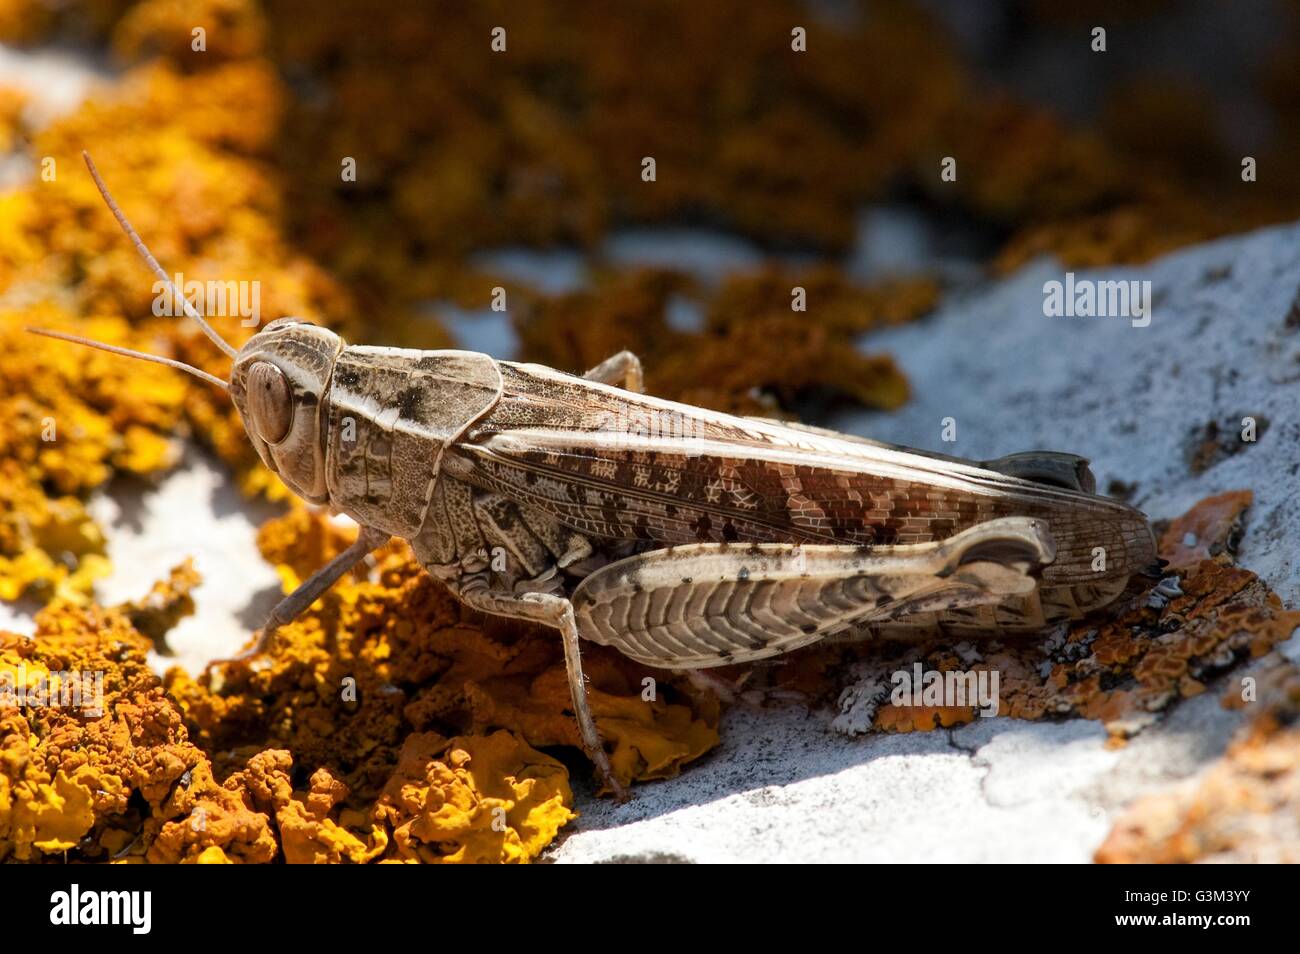 Close up photo of grasshopper on a stone with moss Stock Photo